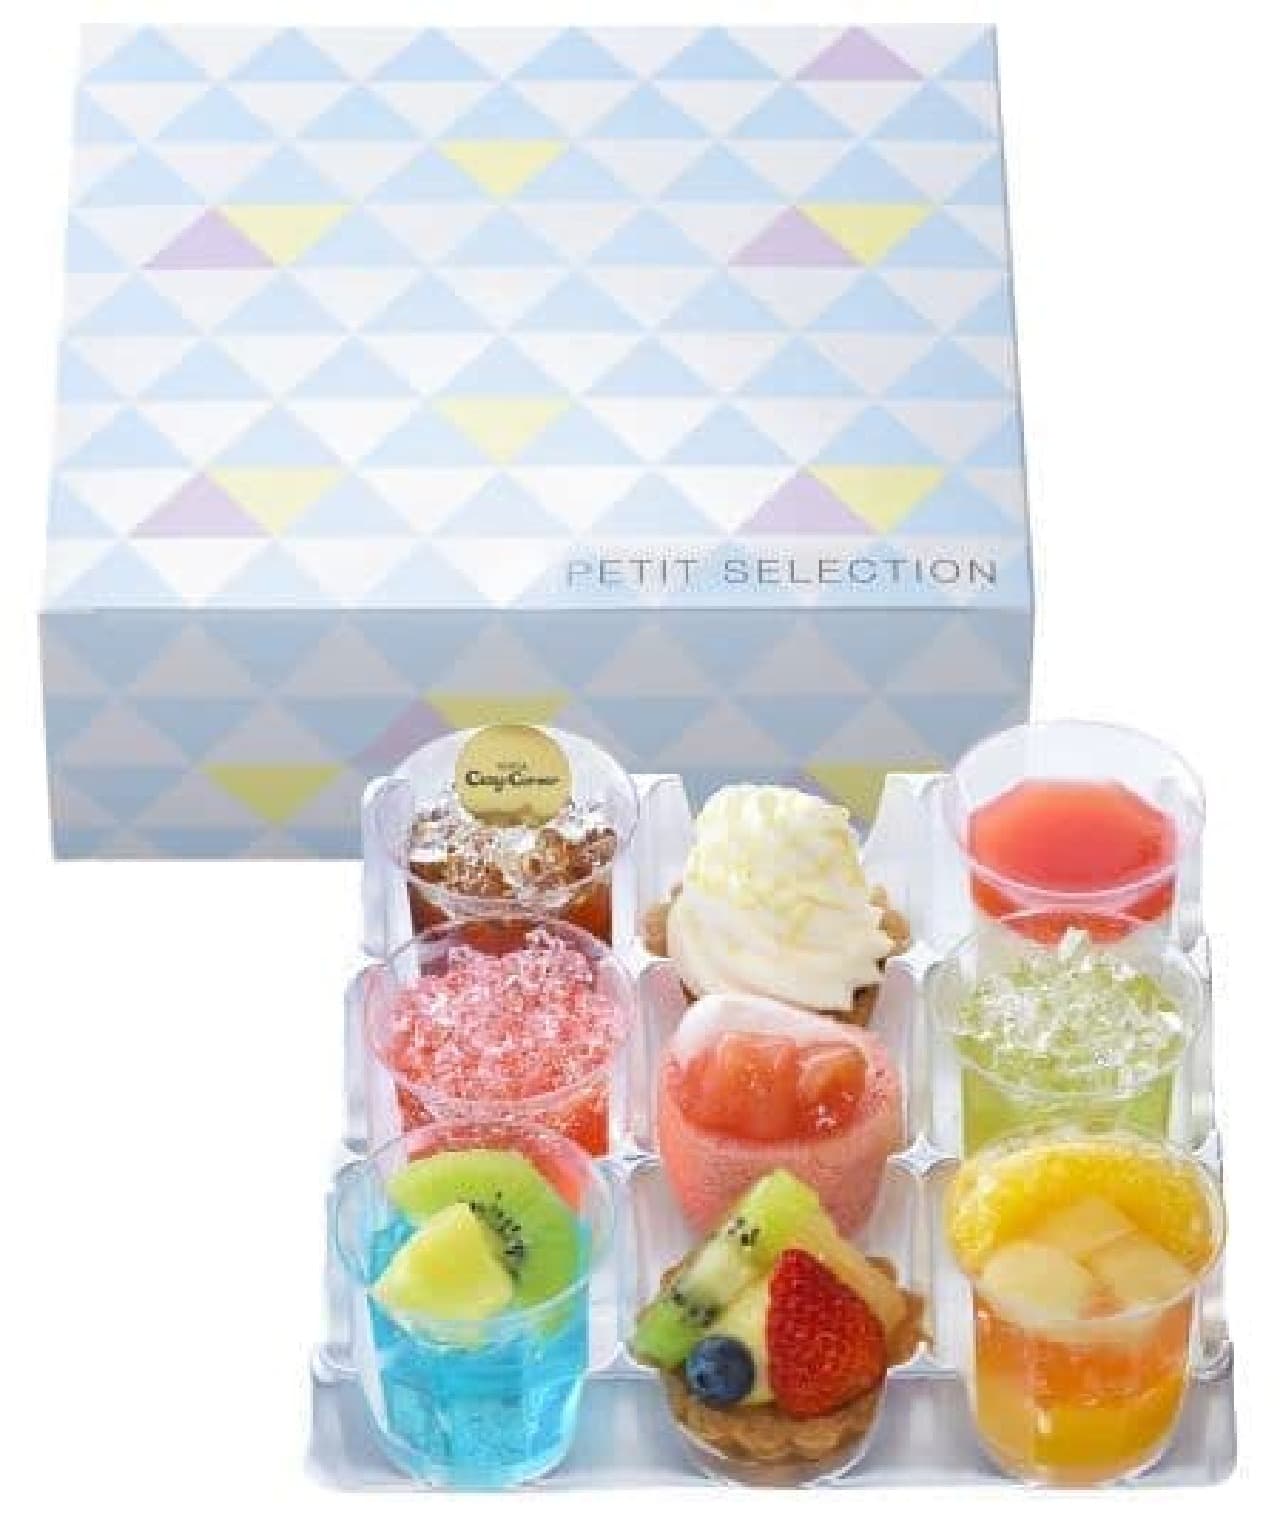 "Petit Selection-Ryoka-" is an assortment with a refreshing feeling centered on cup desserts that are popular in midsummer.